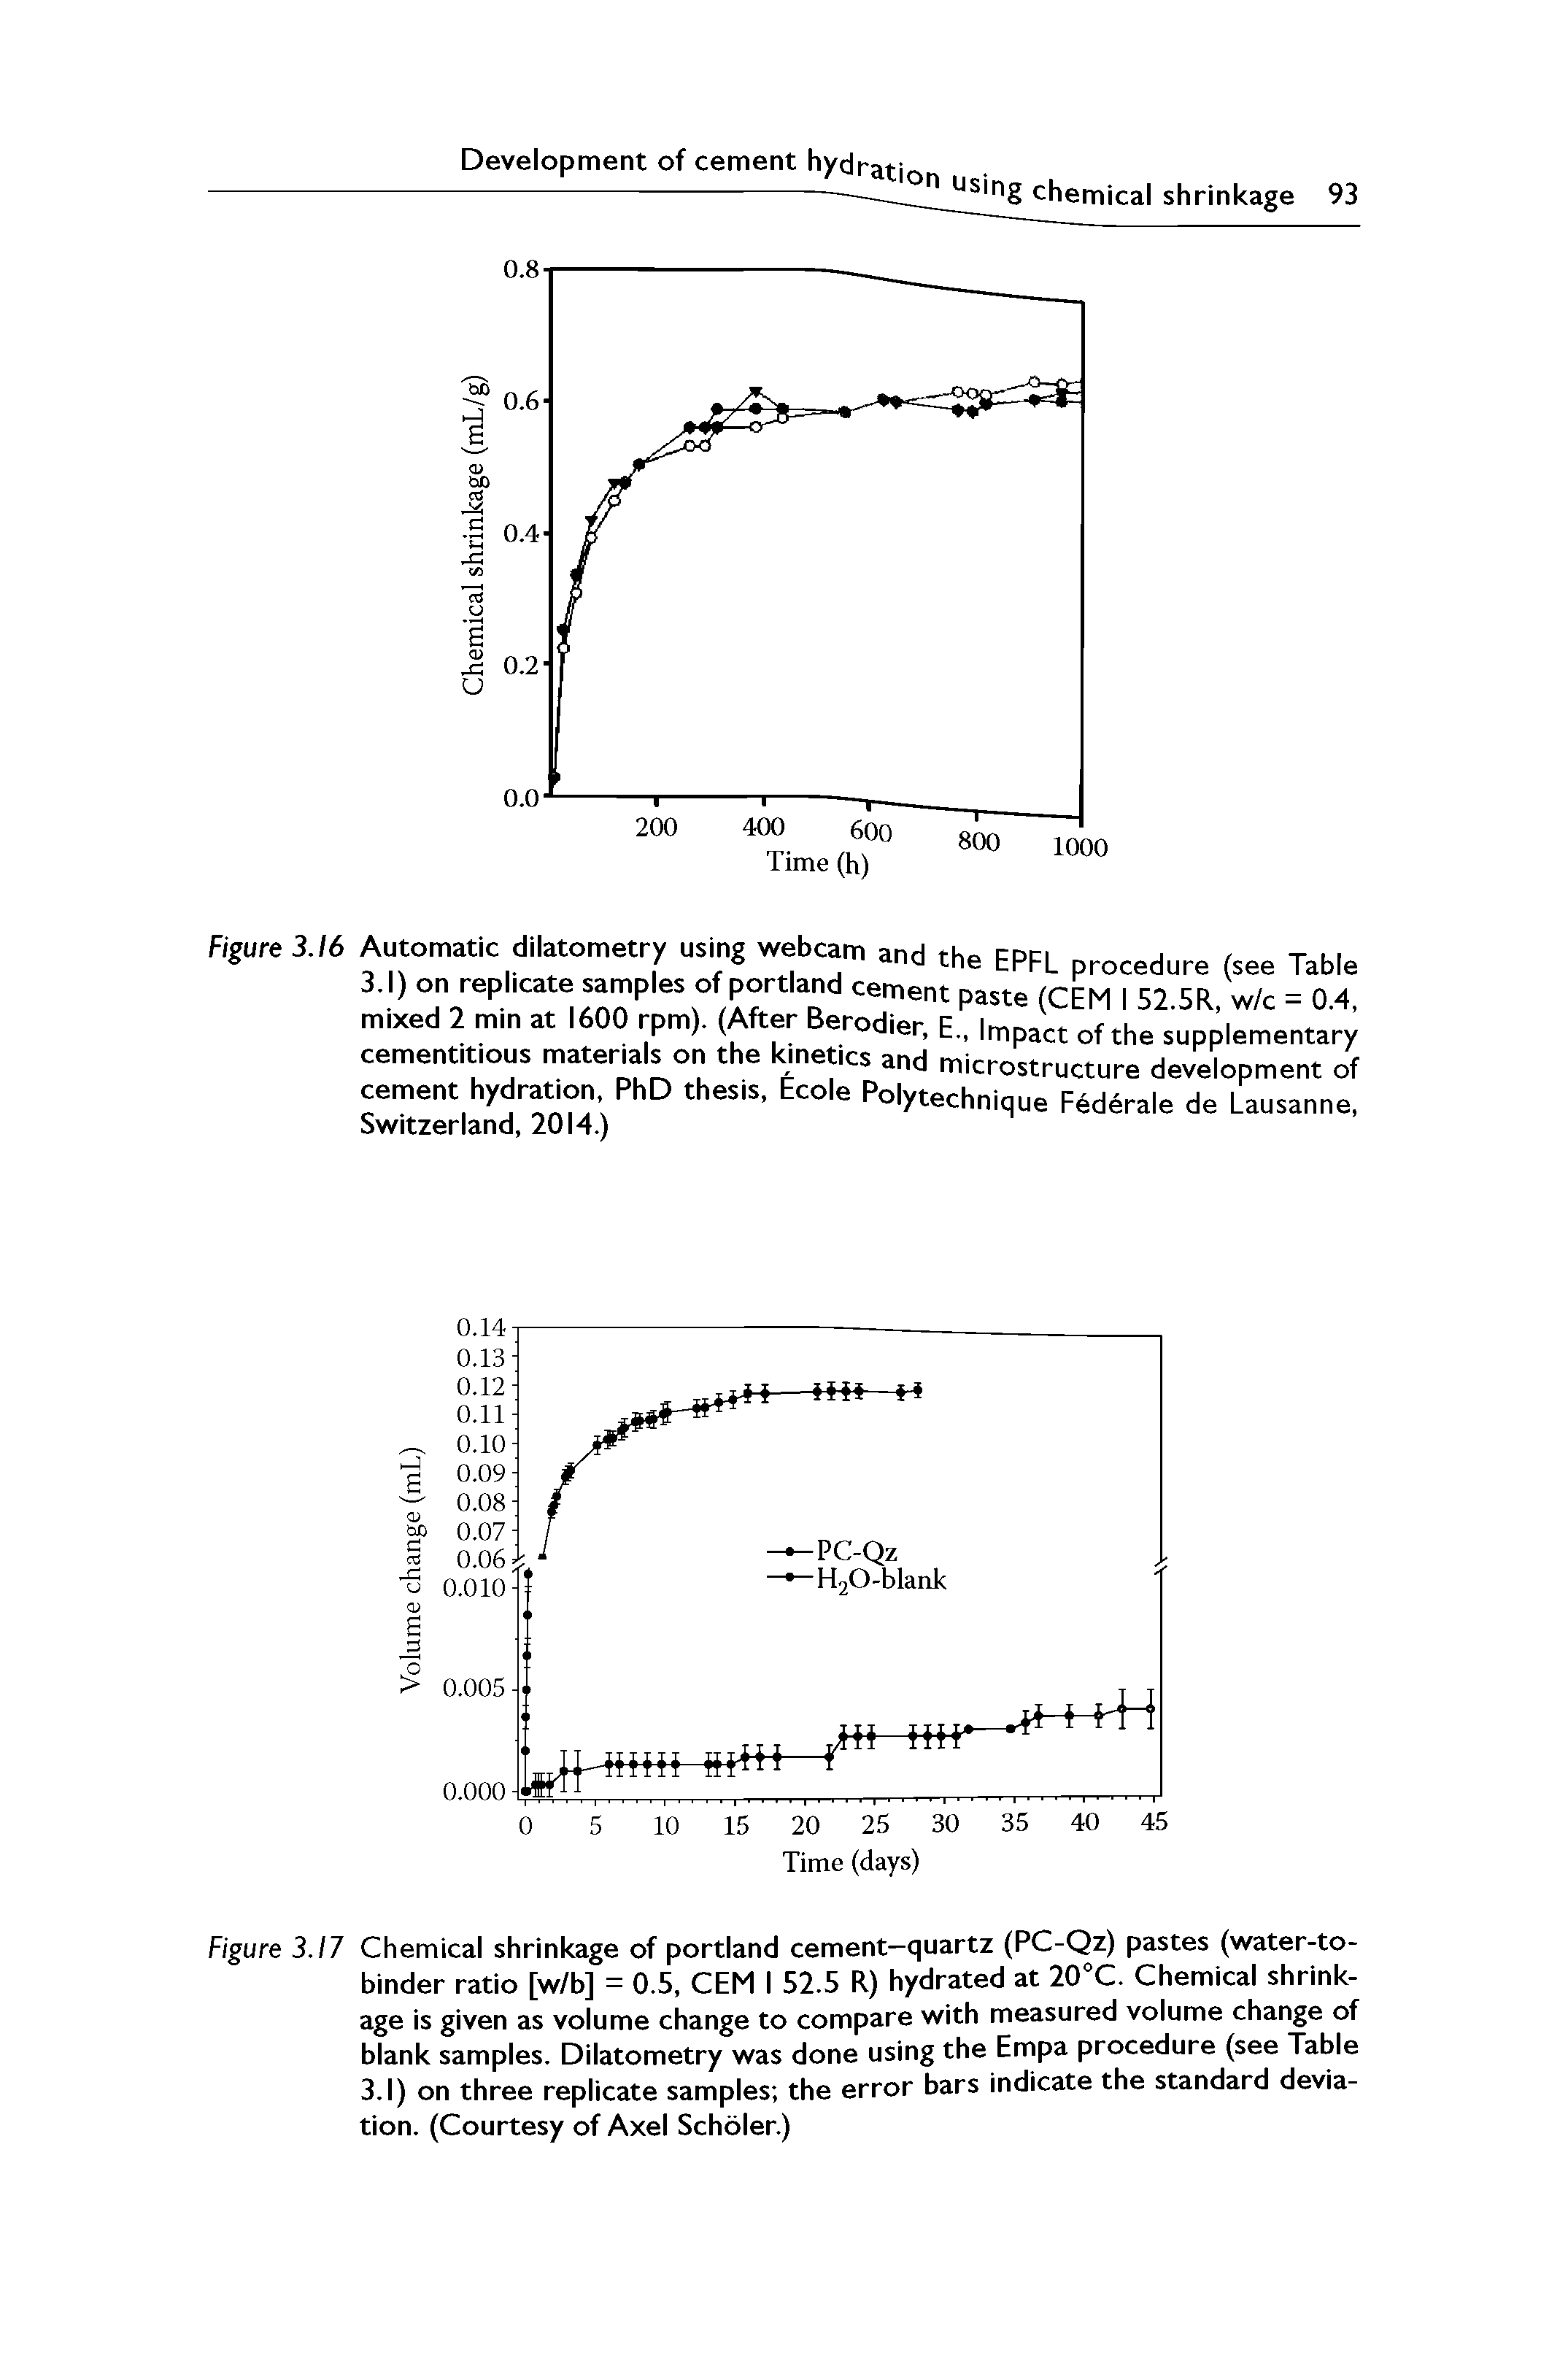 Figure 3.17 Chemical shrinkage of portland cement-quartz (PC-Qz) pastes (water-to-binder ratio [w/b] = 0.5, CEM I 52.5 R) hydrated at 20°C. Chemical shrinkage is given as volume change to compare with measured volume change of blank samples. Dilatometry was done using the Empa procedure (see Table 3.1) on three replicate samples the error bars indicate the standard deviation. (Courtesy of Axel Scholer.)...